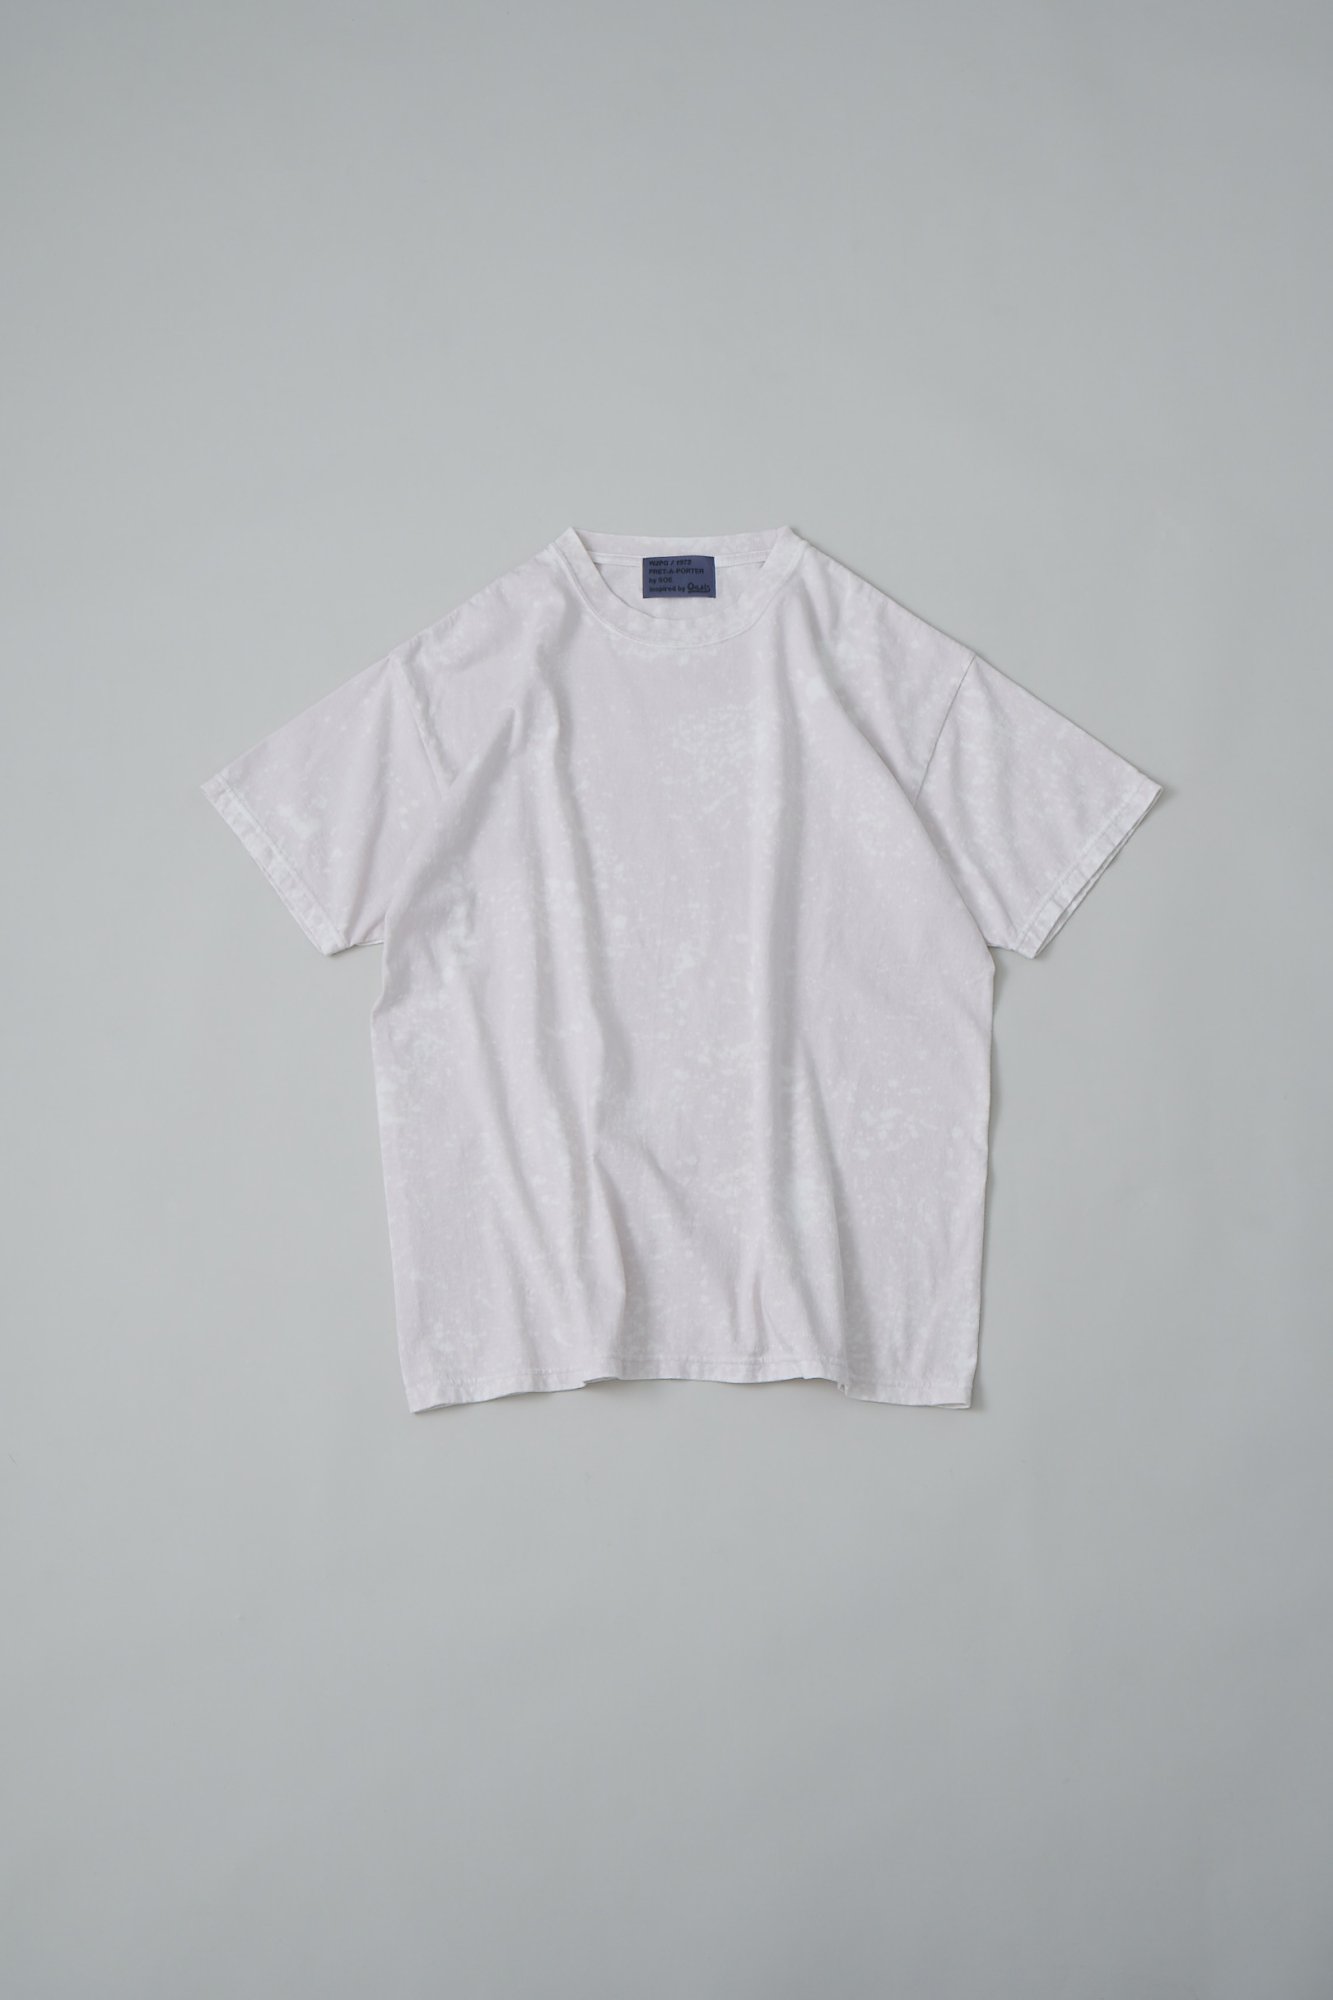 soe<br />Bleached T Shirts Not foe sale with AOR / PINK<img class='new_mark_img2' src='https://img.shop-pro.jp/img/new/icons14.gif' style='border:none;display:inline;margin:0px;padding:0px;width:auto;' />